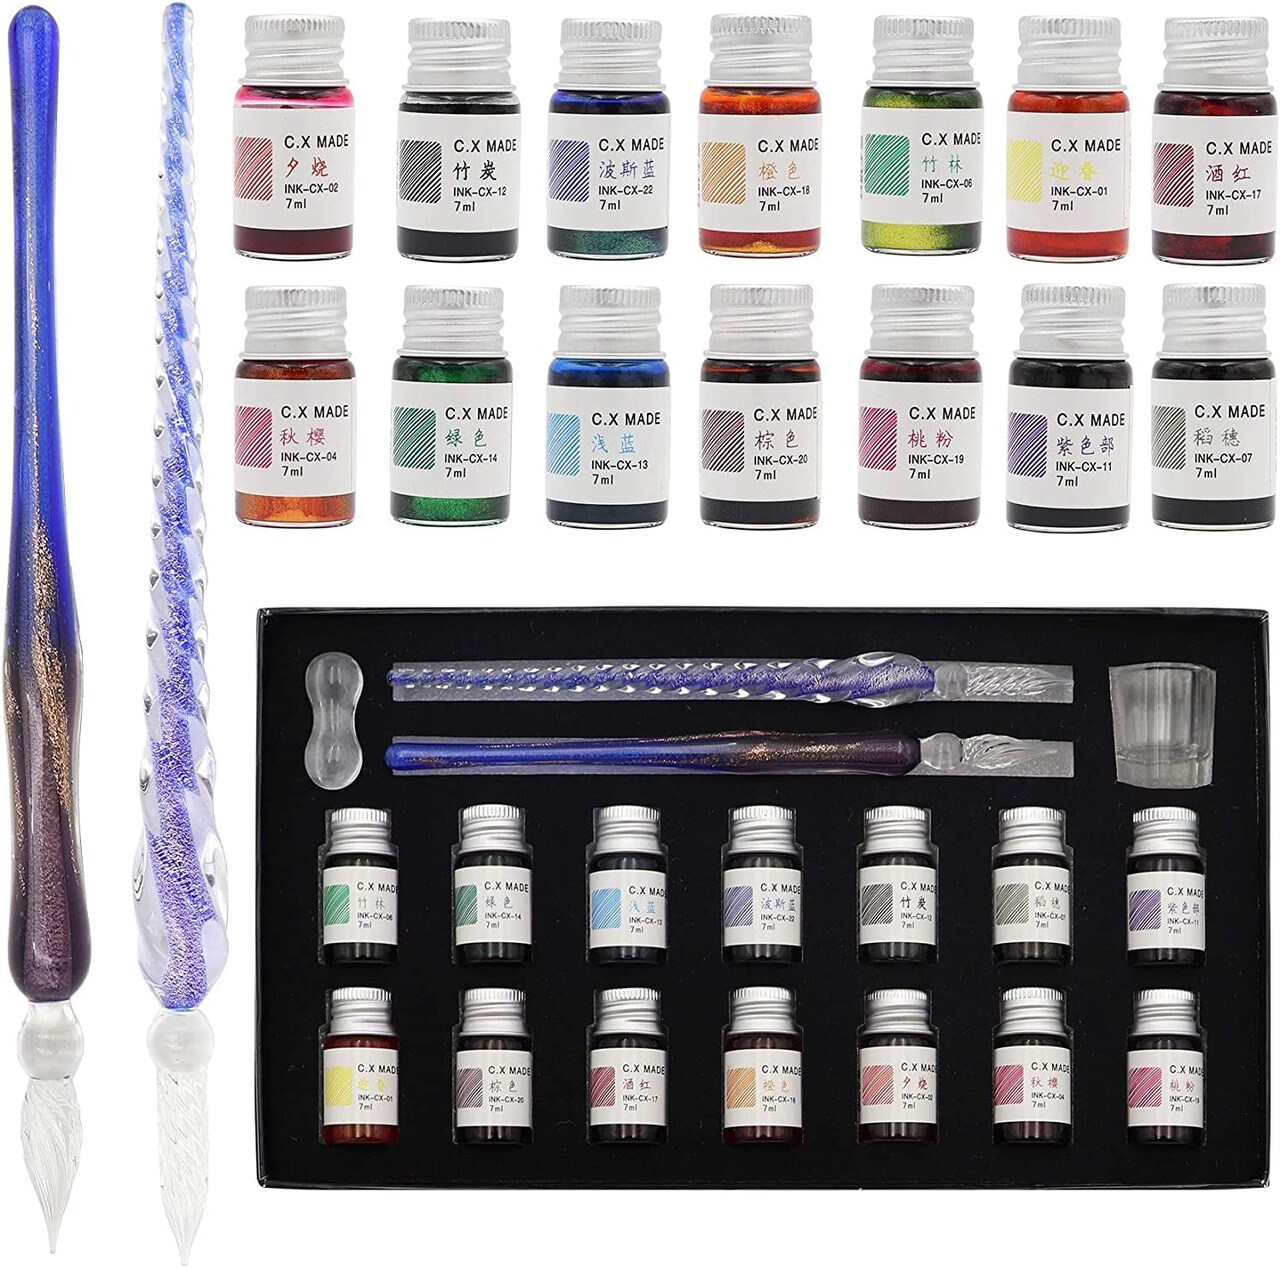 Glass Dip Calligraphy Pen Set, 18-Pieces 14 Color Inks, Pen Holder,  Cleaning Cup, 2 Crystal Glass Pens for Art, Writing, Drawing, Signatures,  Gift for Kids and Artist